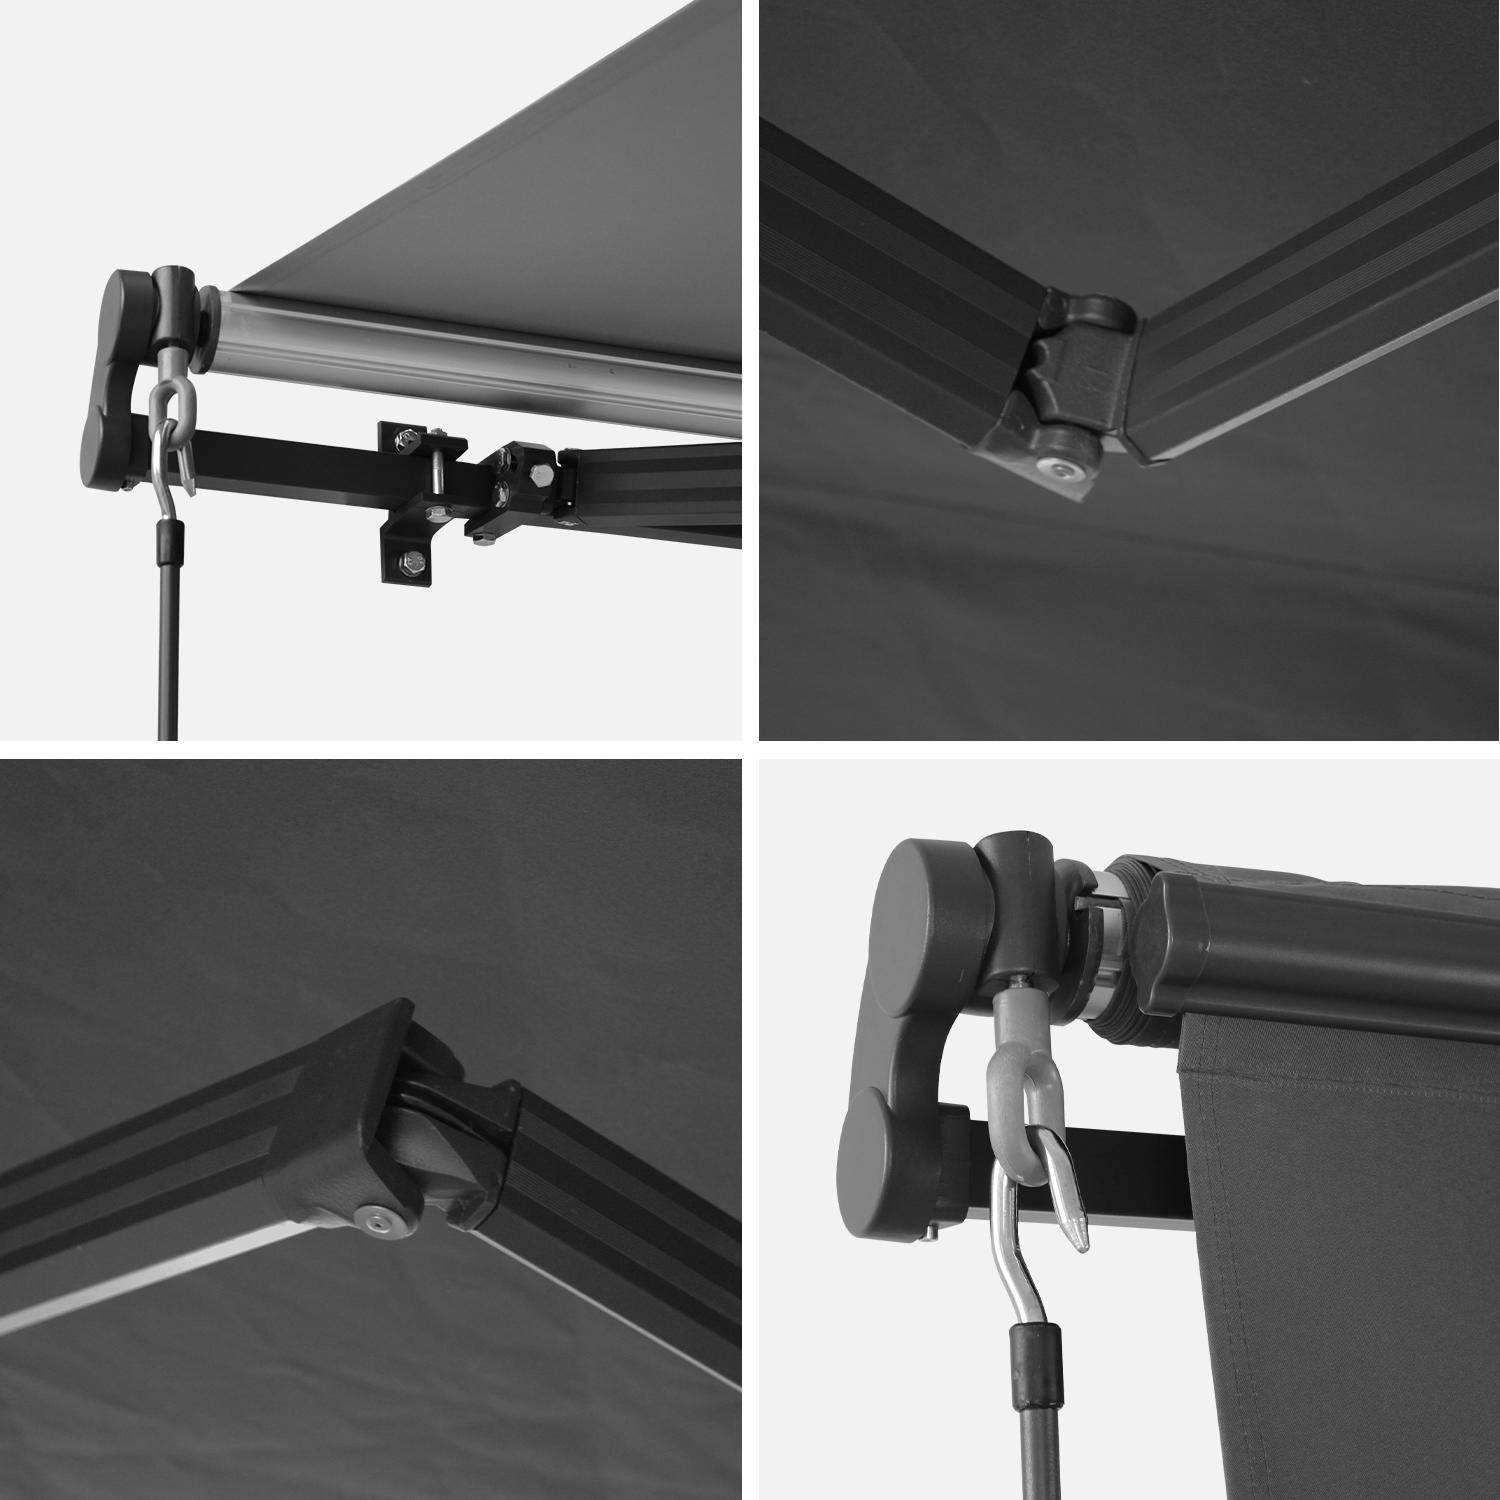 Retractable Patio Awning - wall awning, aluminium structure, manual system, coated polyester fabric - Alombra 3x2m - Grey Photo4